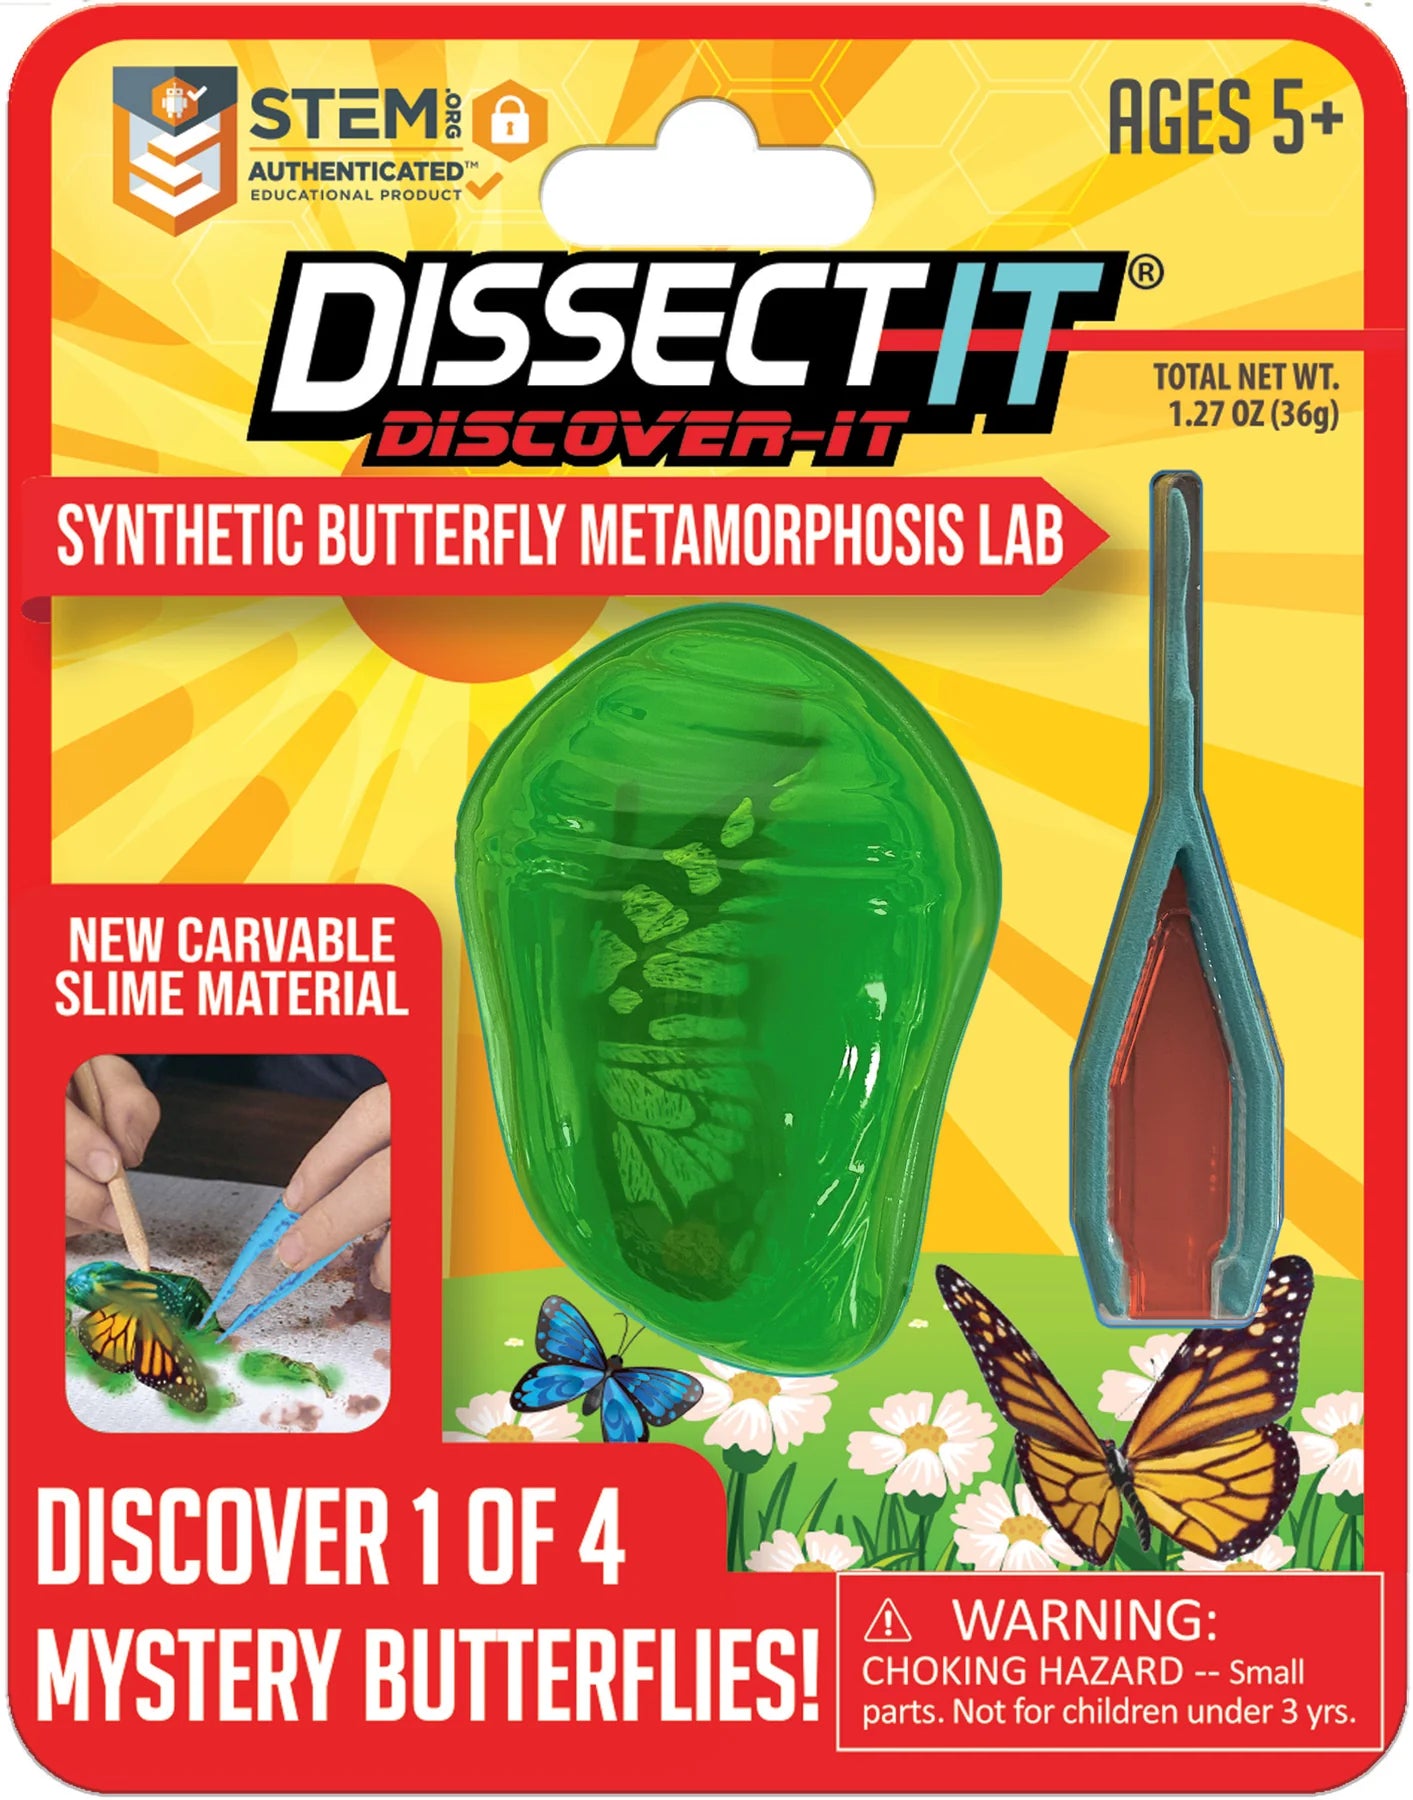 Dissect It: Synthetic Butterfly Metamorphosis Lab by Top Secret Toys #1123-9912